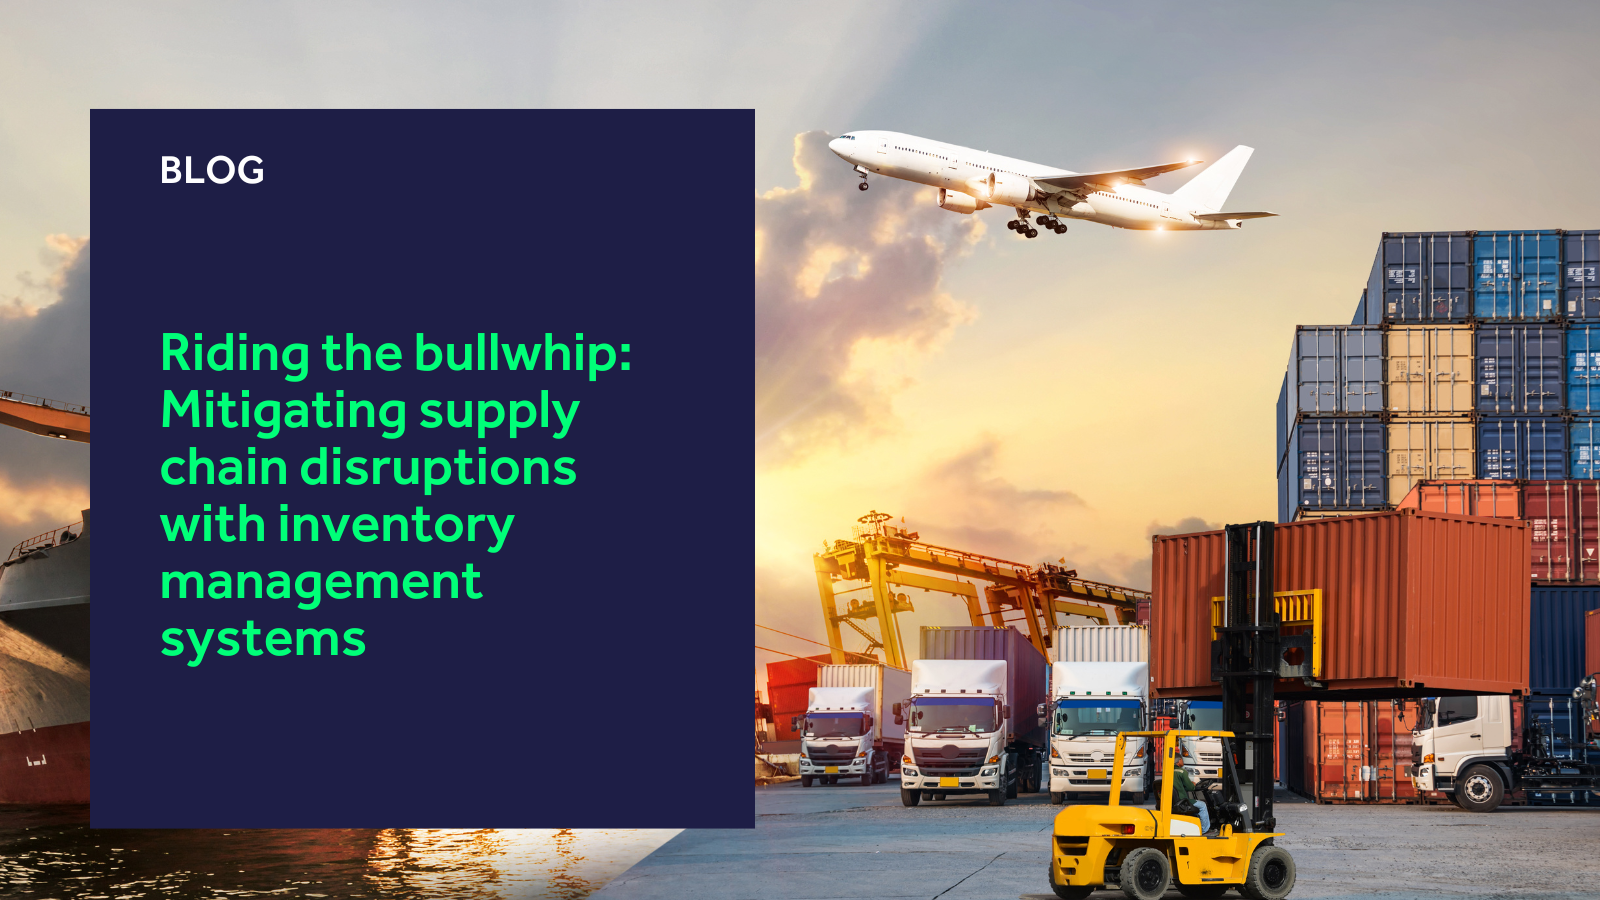 Riding the bullwhip: Mitigating supply chain disruptions with inventory management systems blog header